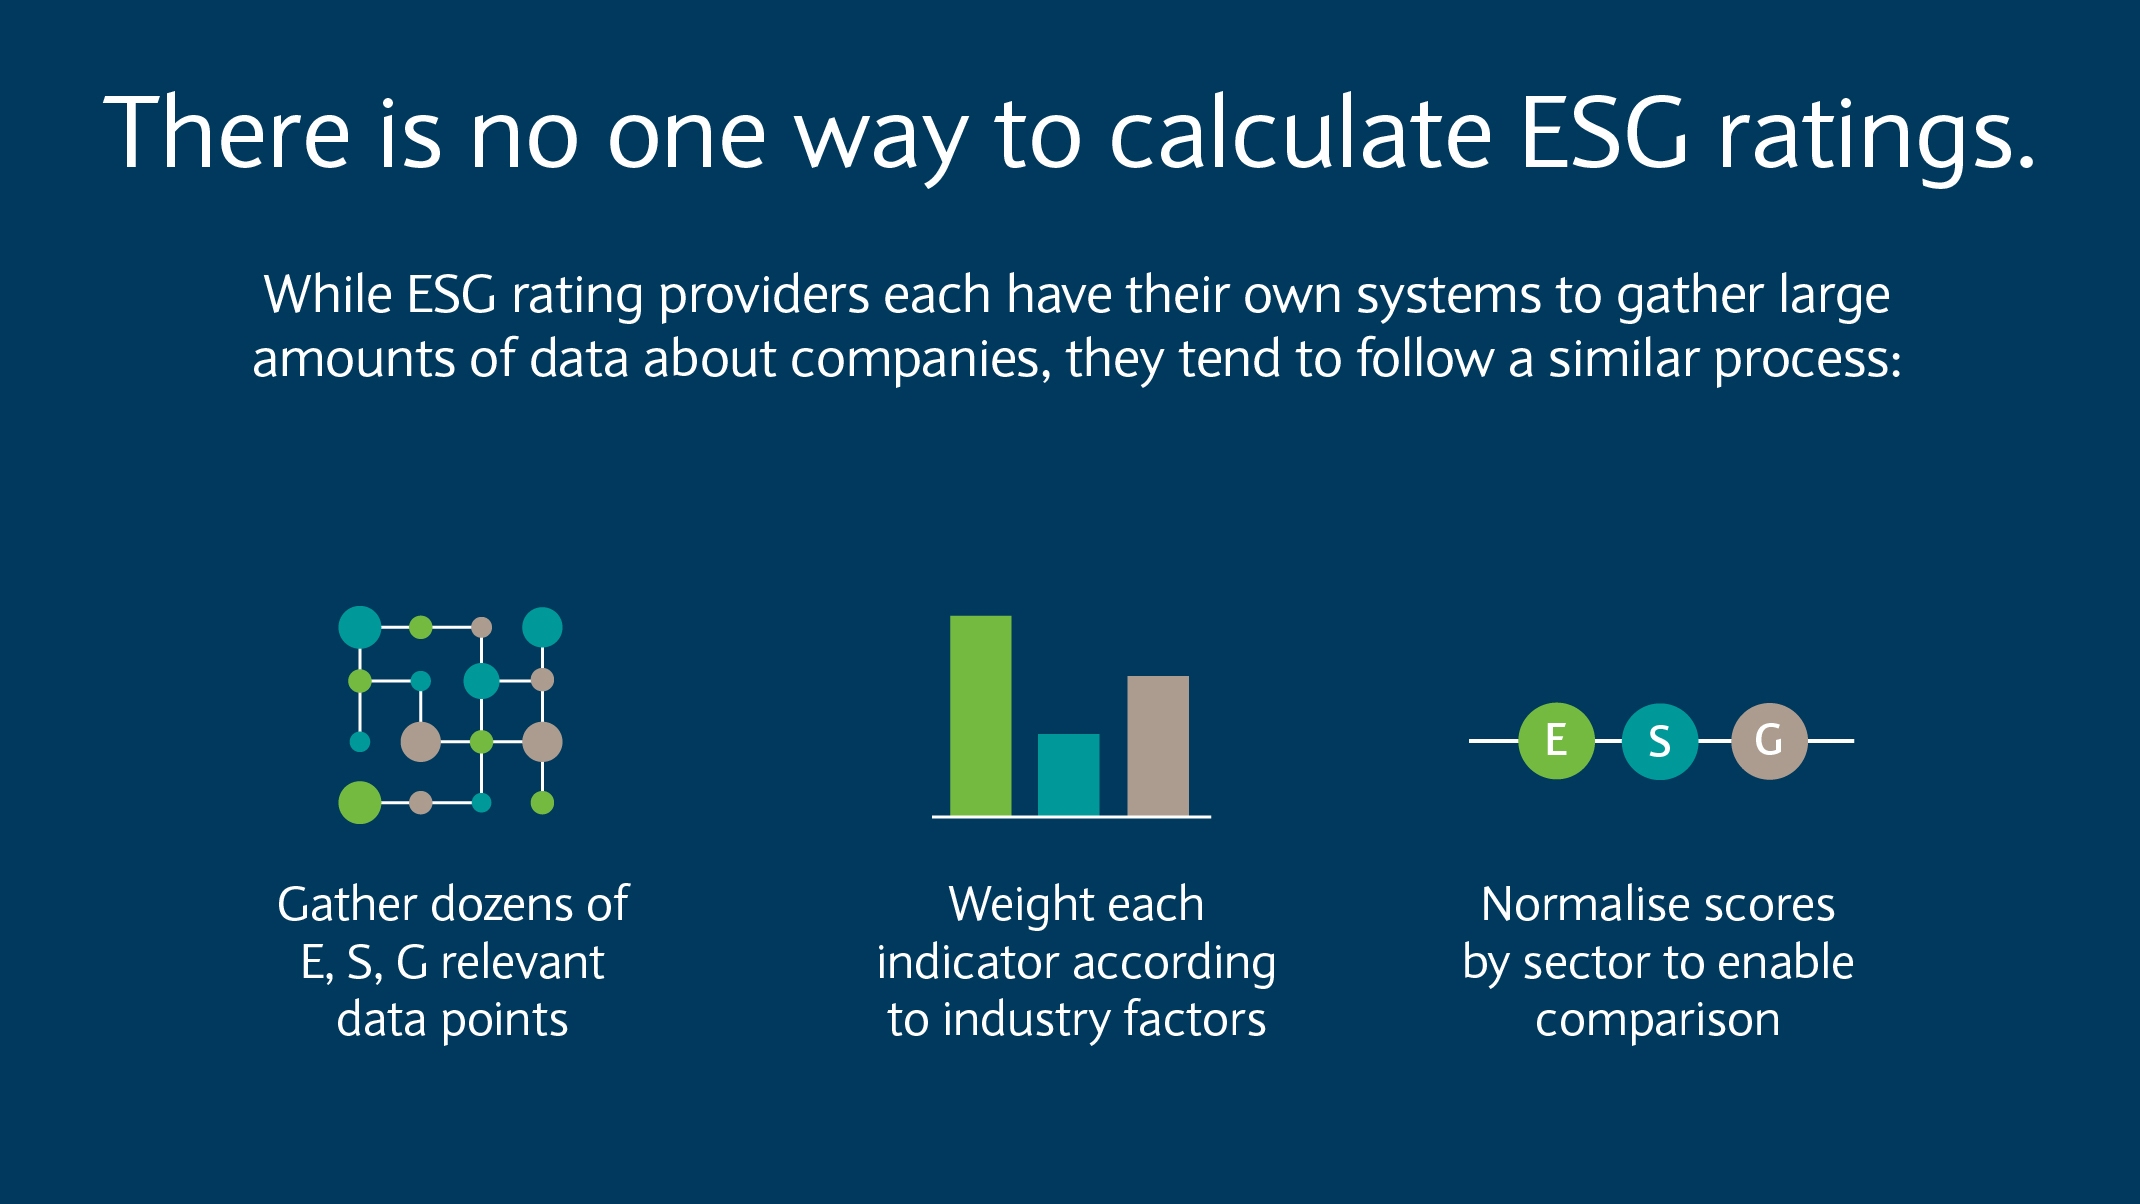 There is no one way to calculate ESG ratings. Providers each have their own systems but tend to follow a similar process.